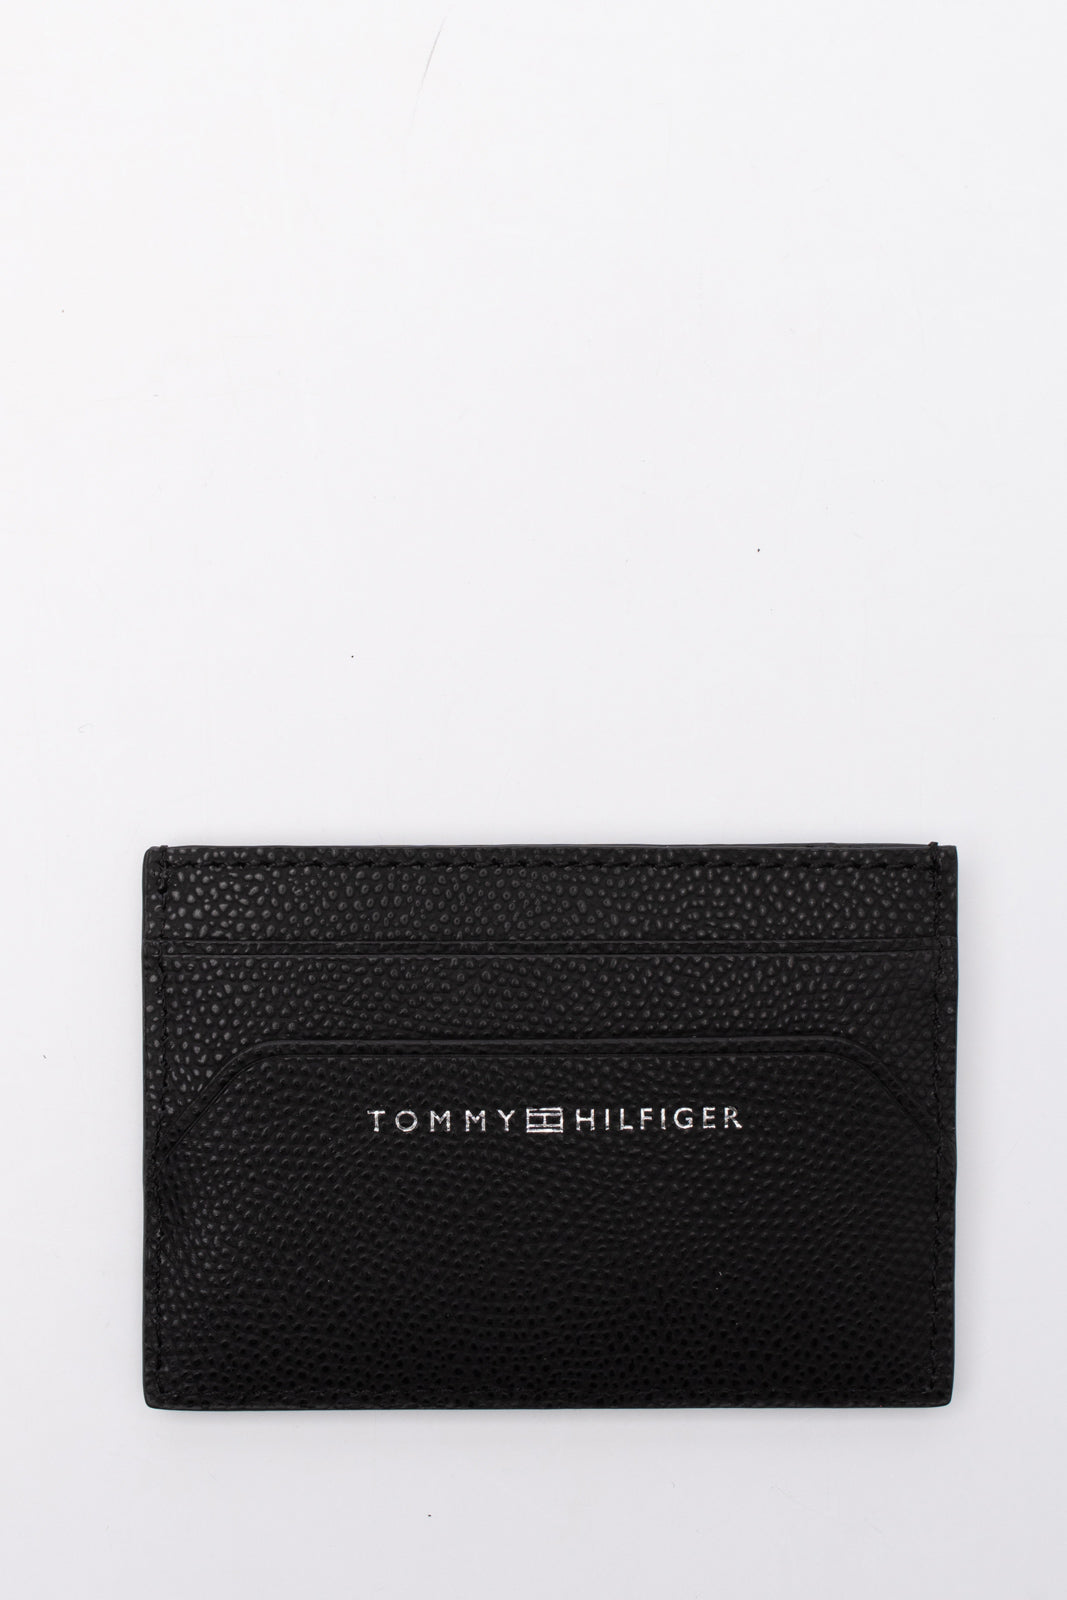 TOMMY HILFIGER Grainy Leather Business Card Holder Mini Wallet RFID Blocking gallery main photo